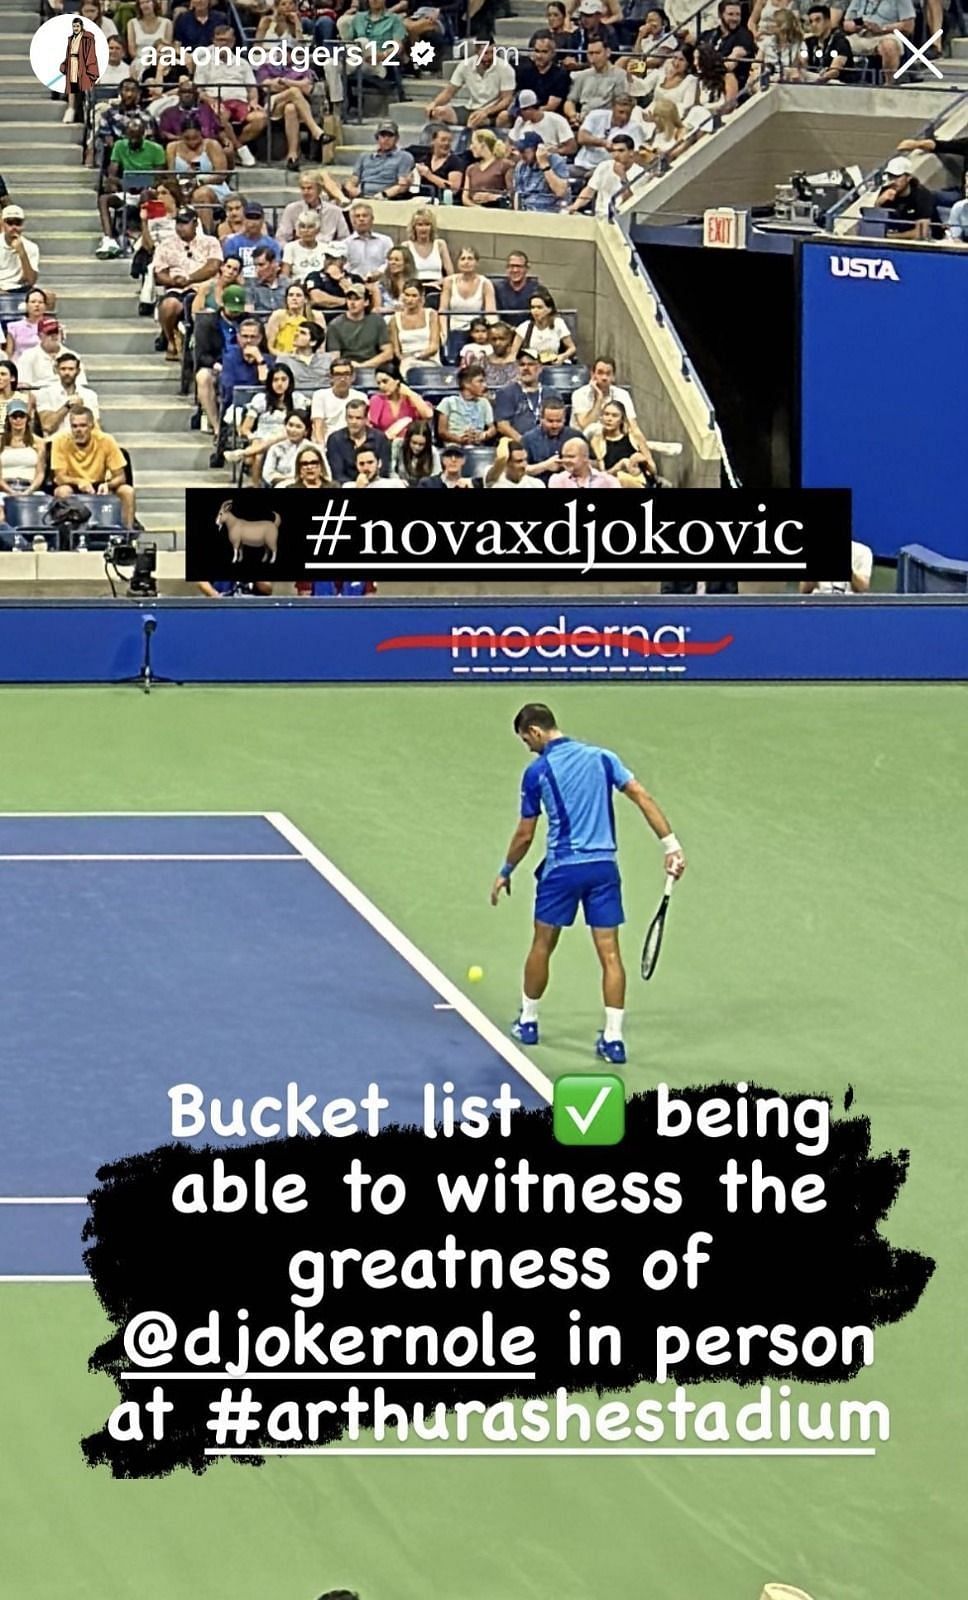 Aaron Rodgers&#039; Instagram Story at the US Open mocking his and Novak Djokovic&#039;s unvaccinated status